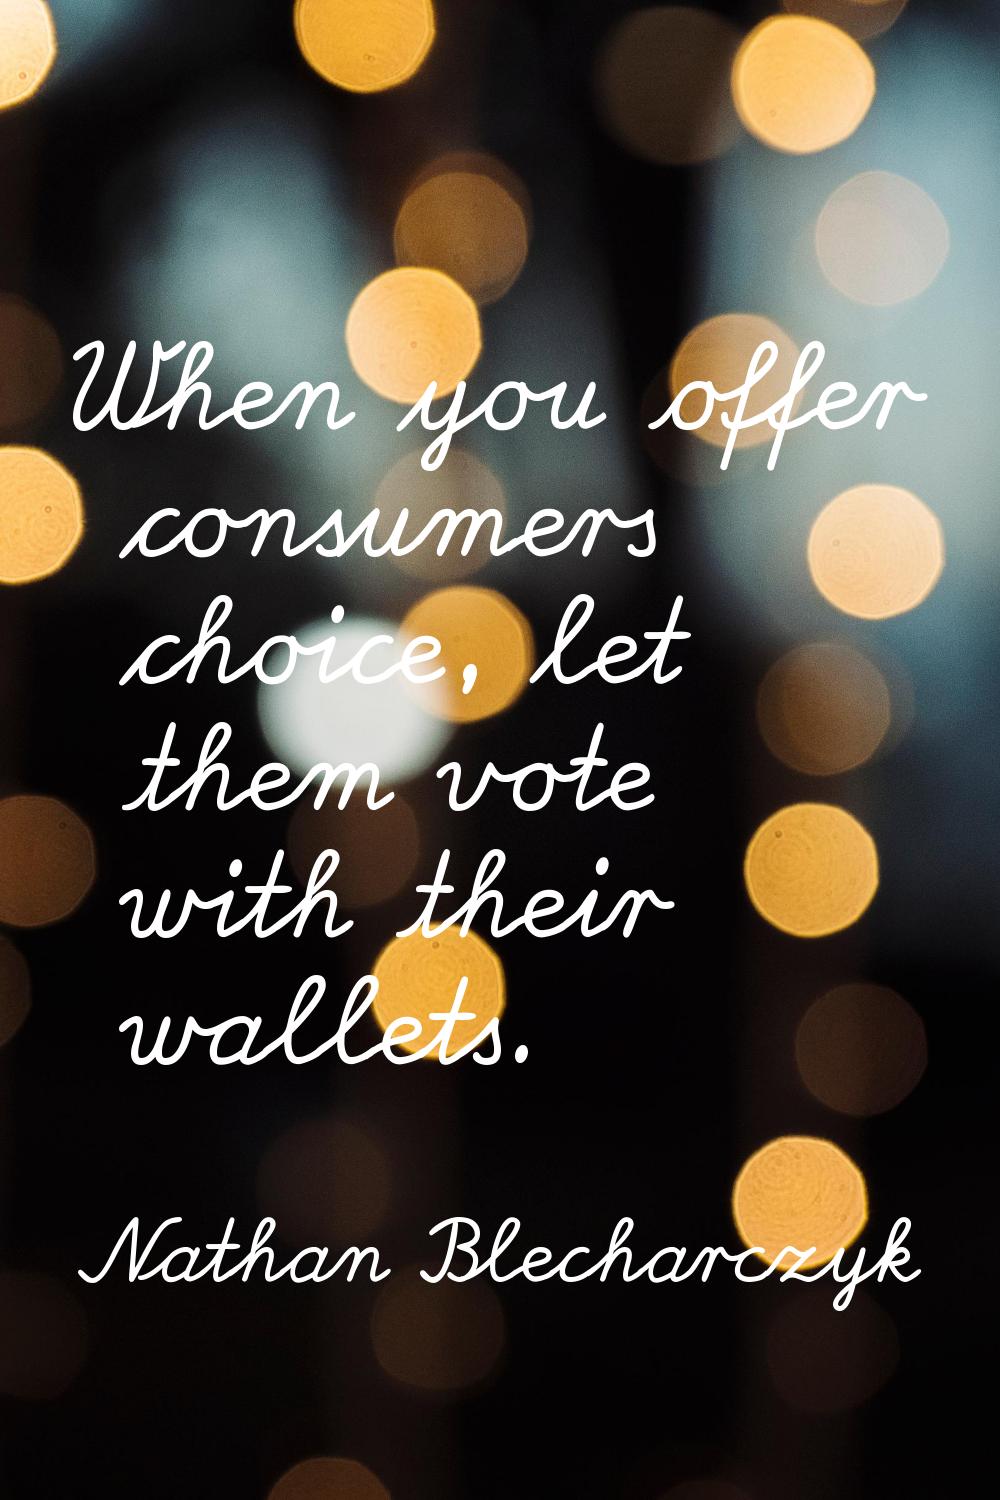 When you offer consumers choice, let them vote with their wallets.